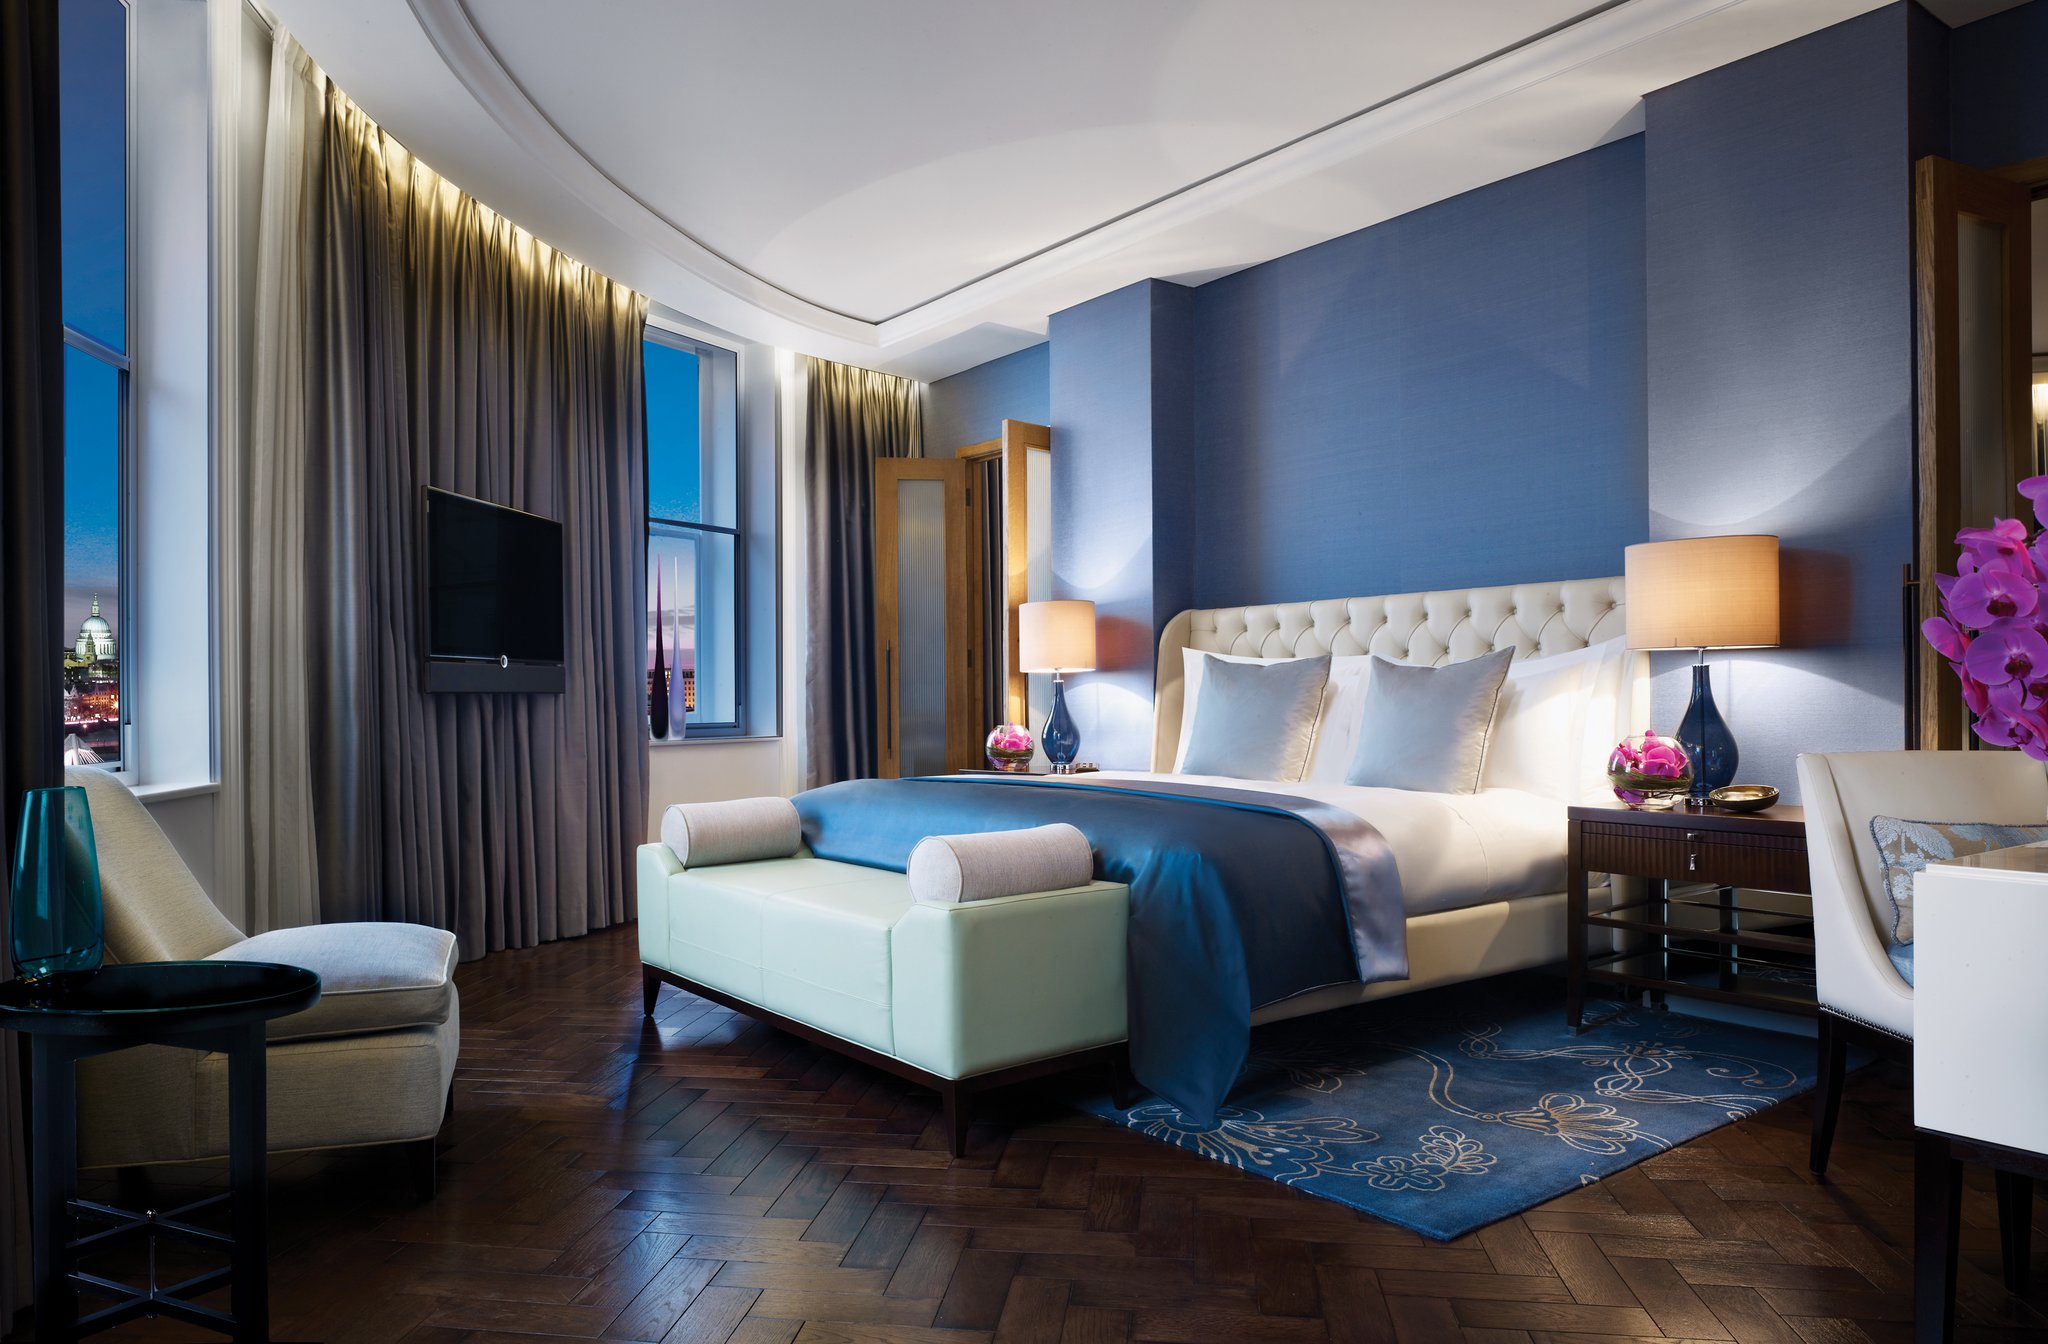 Bleisure Travel: 10 Business Hotels That Combine Productivity With Fun